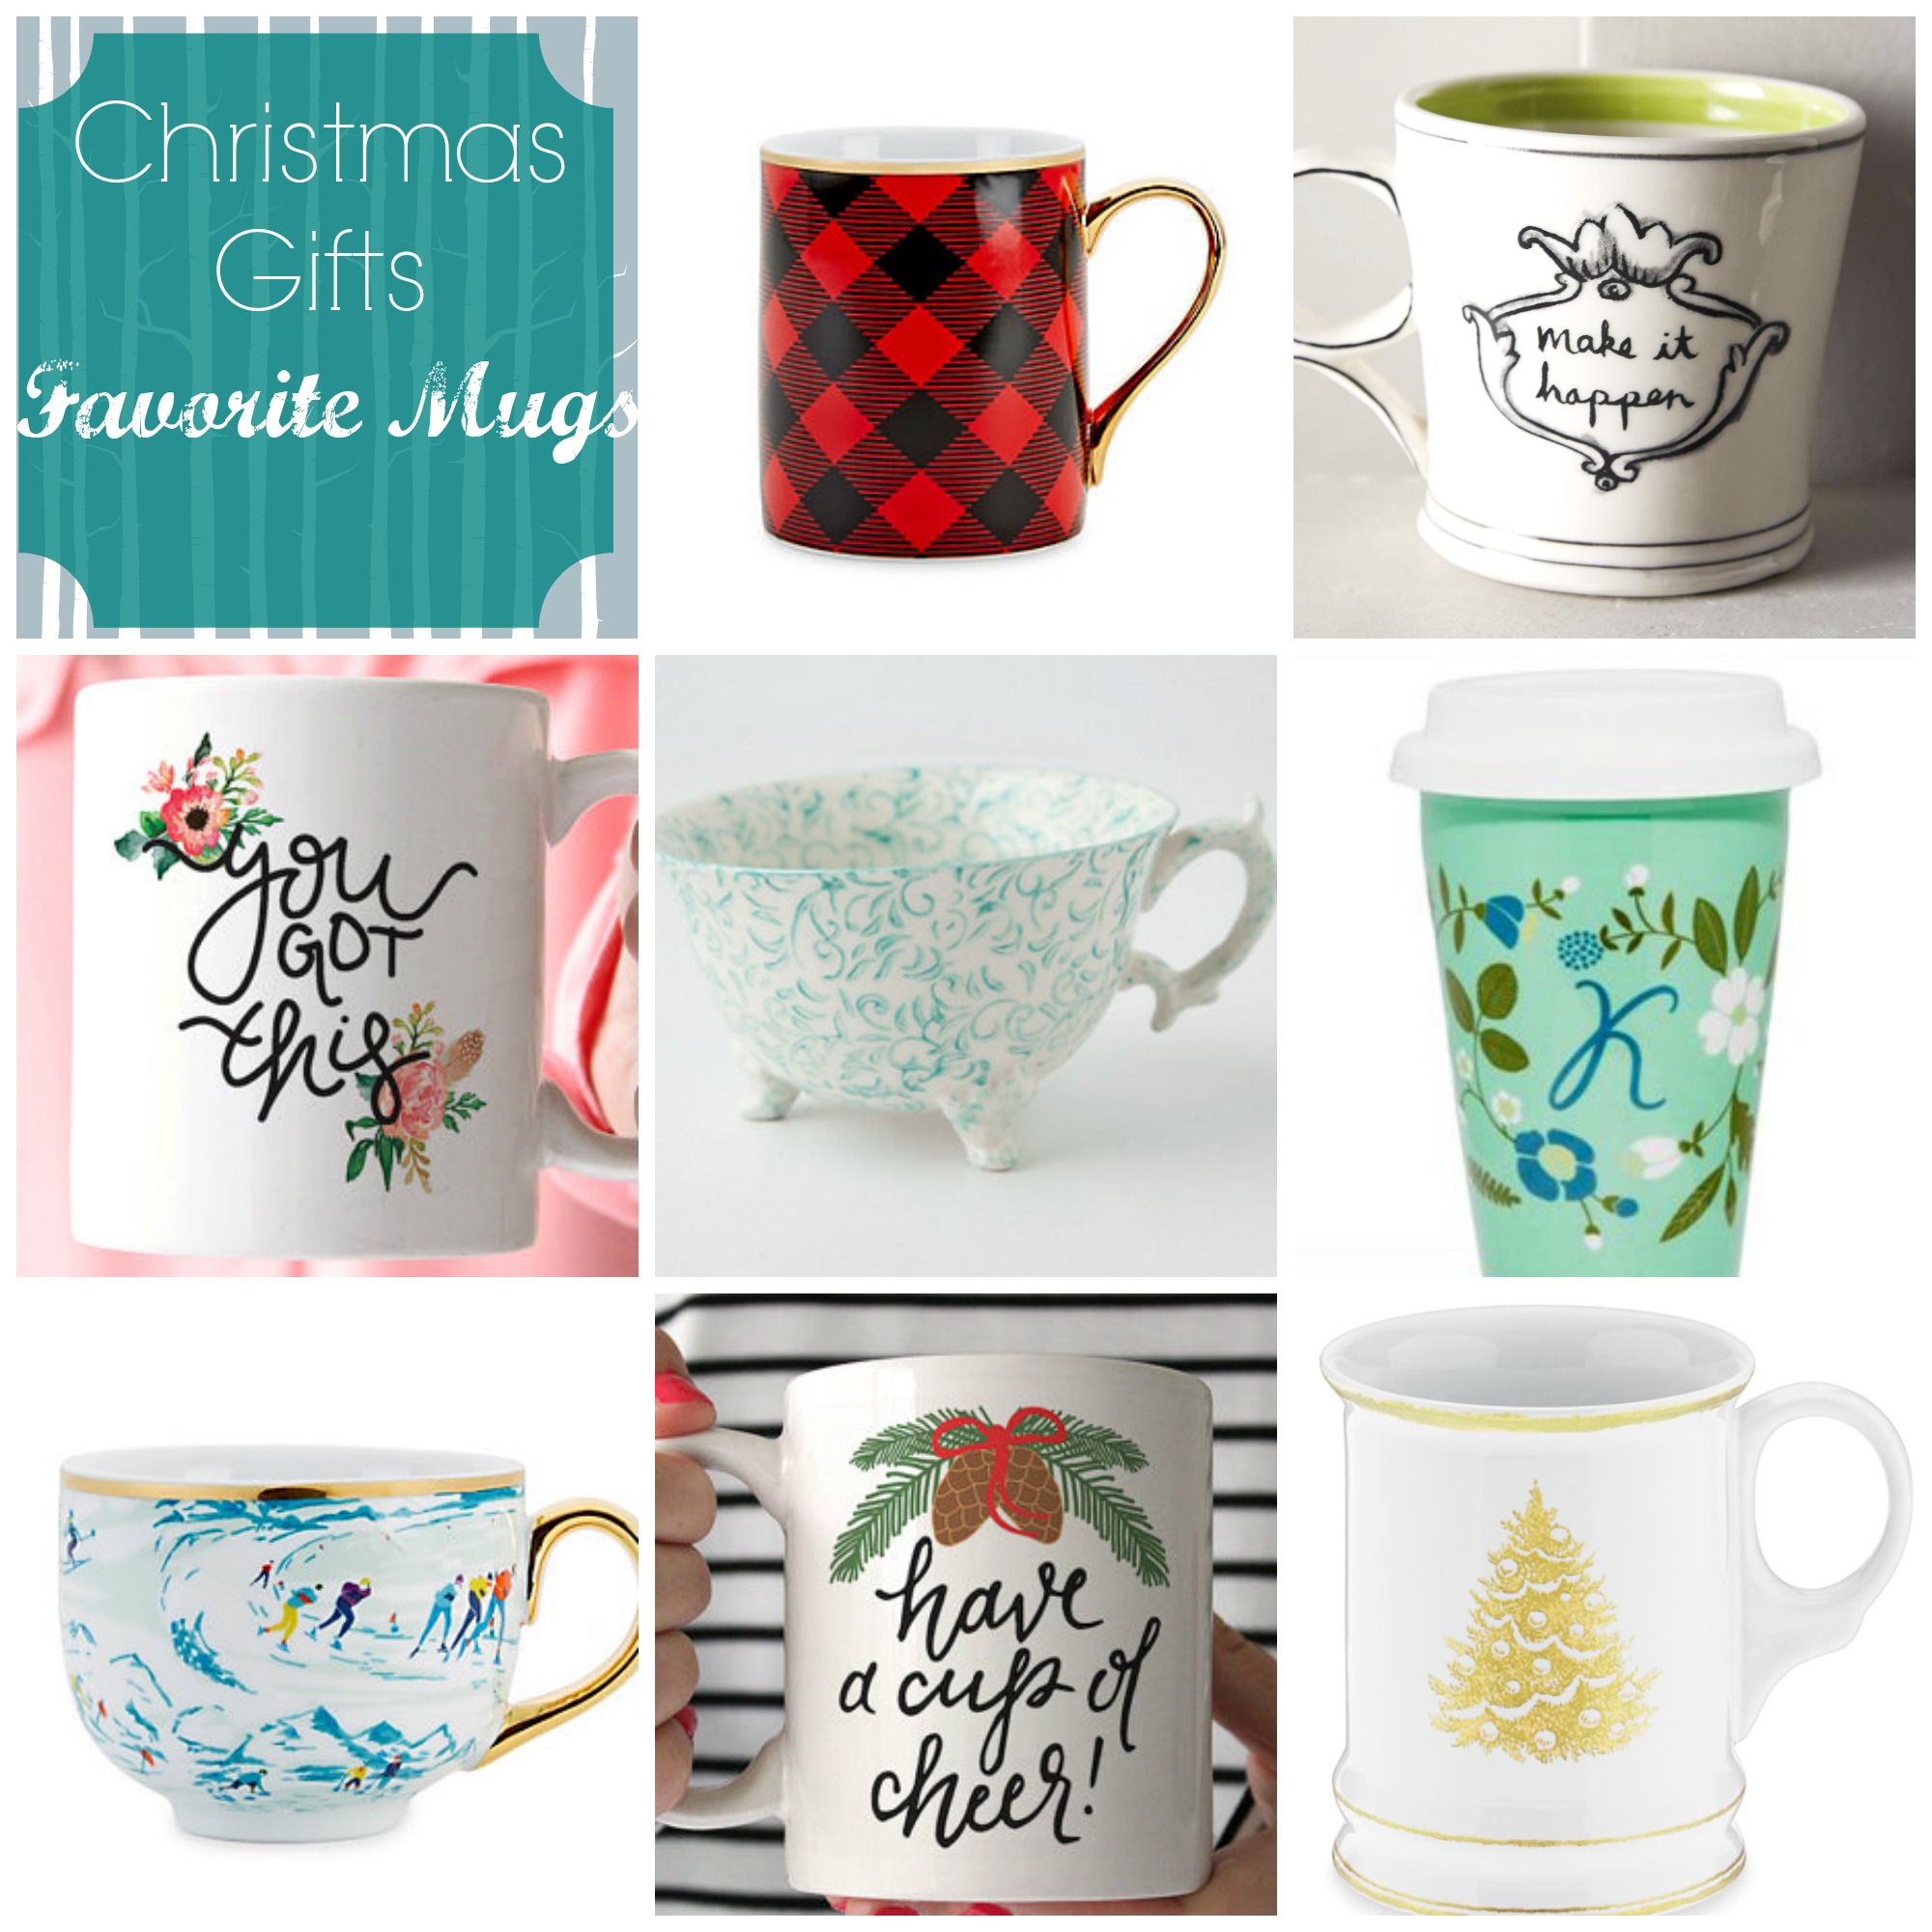 Favorite Mugs for Gifts at Cup of Tea